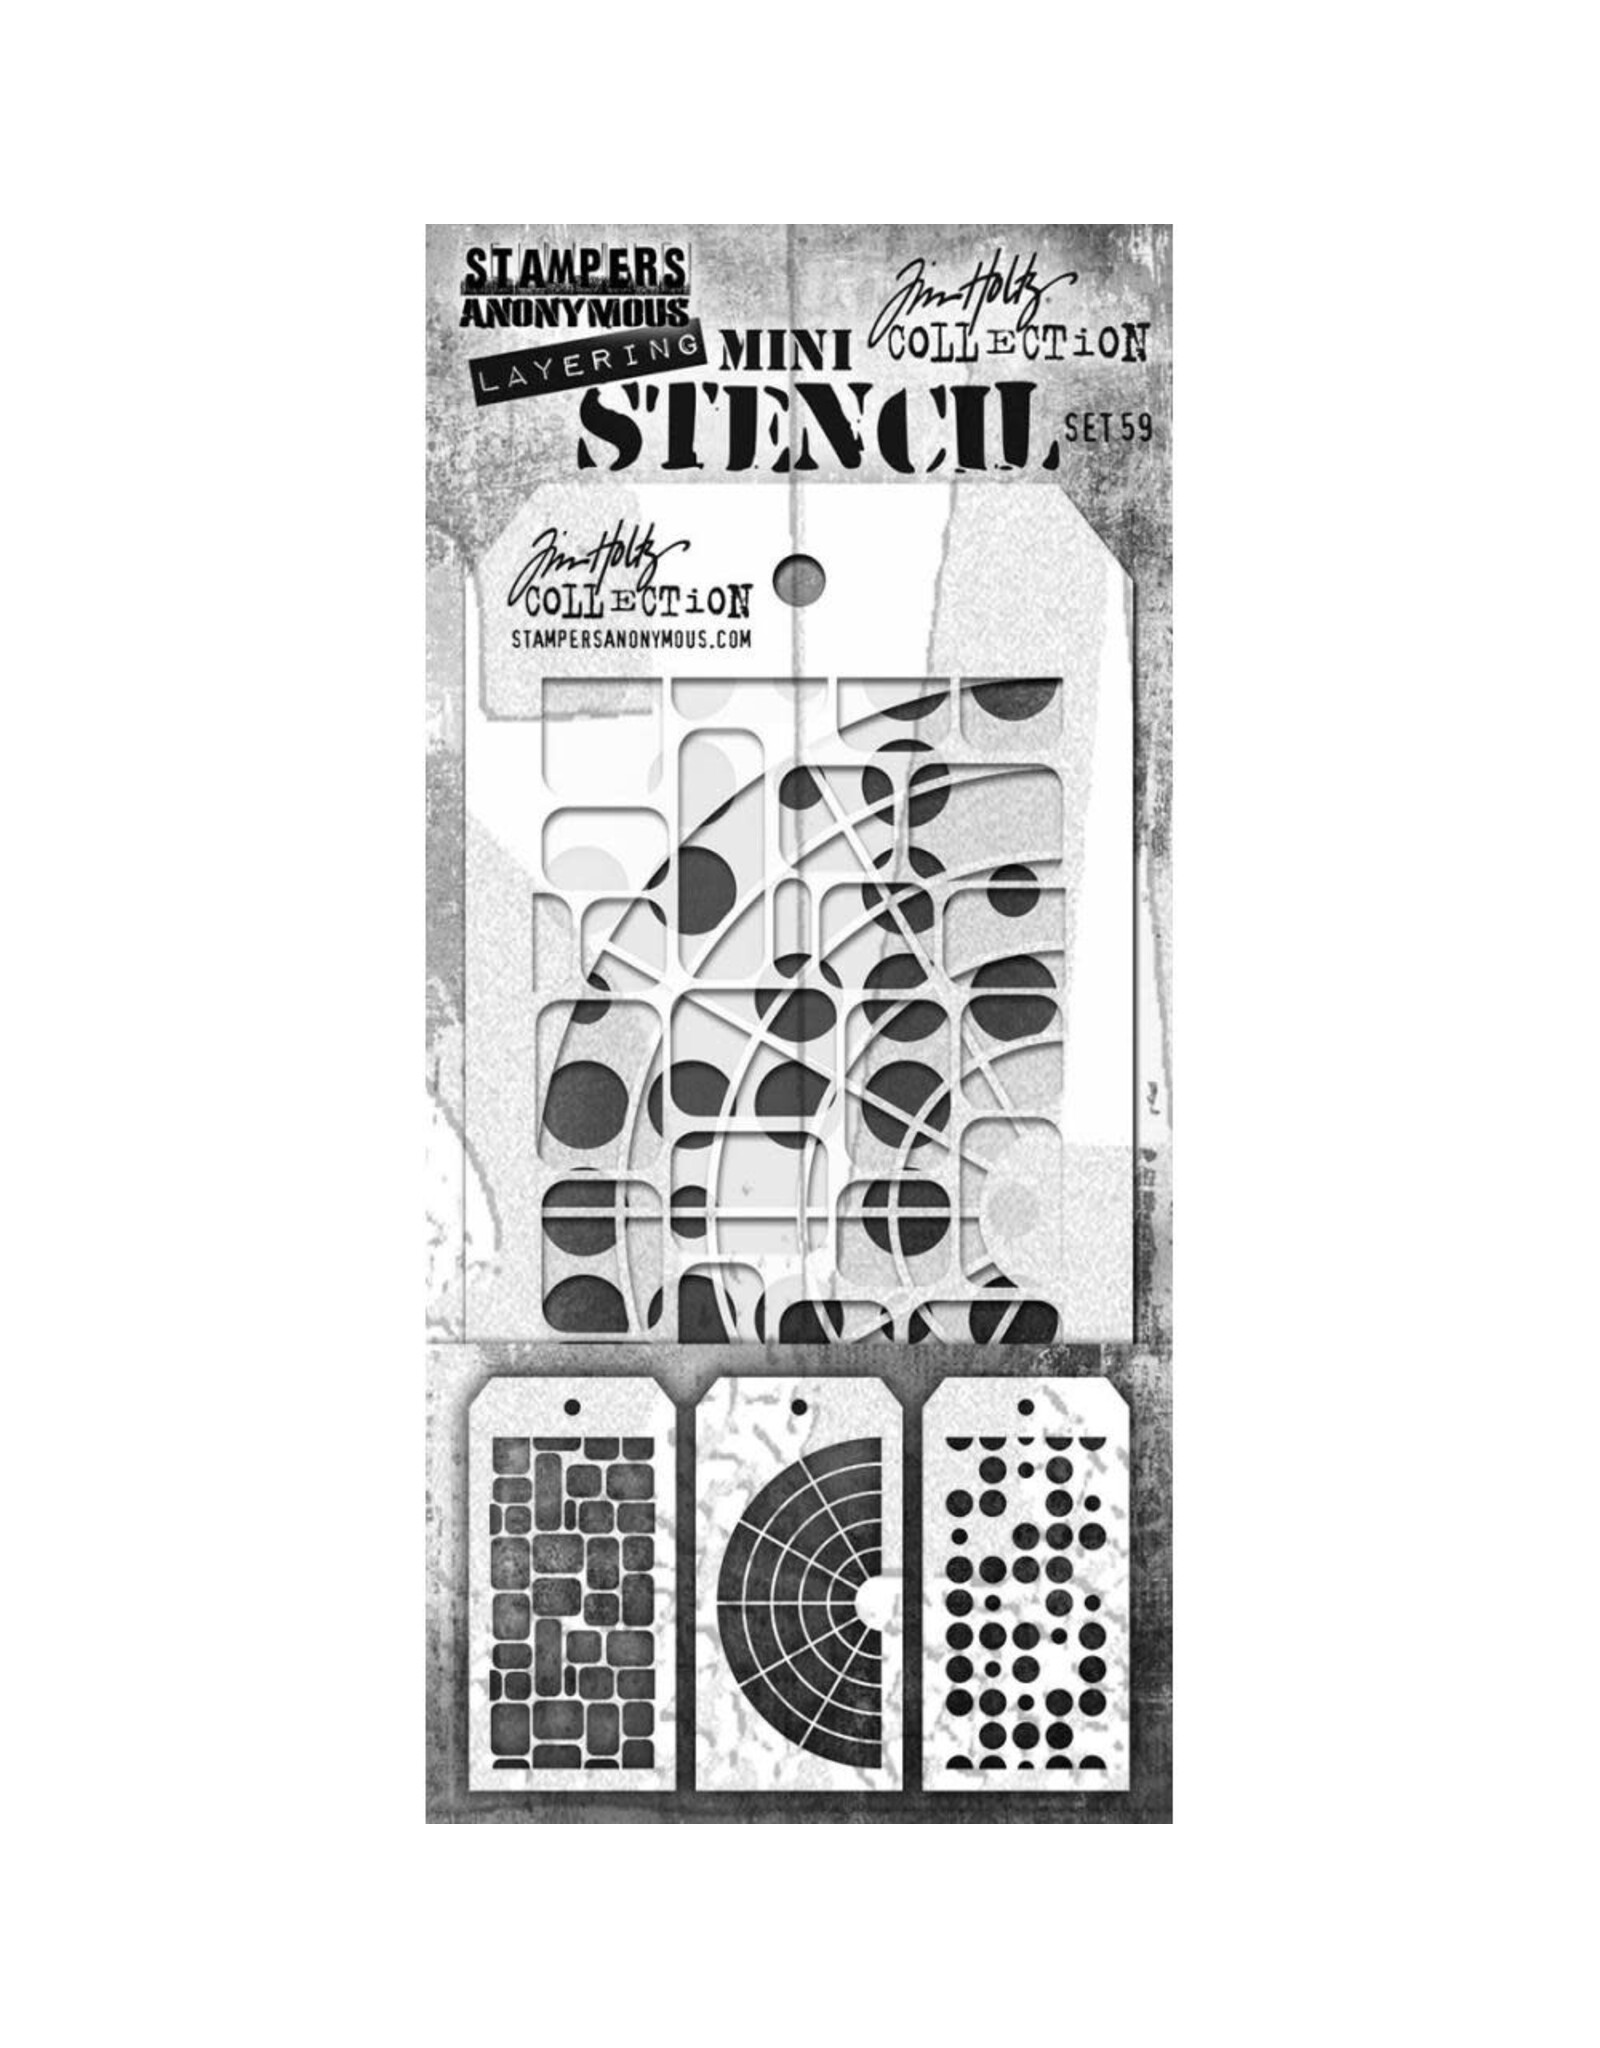 STAMPERS ANONYMOUS STAMPERS ANONYMOUS TIM HOLTZ MINI LAYERING STENCIL SET 59 3PK